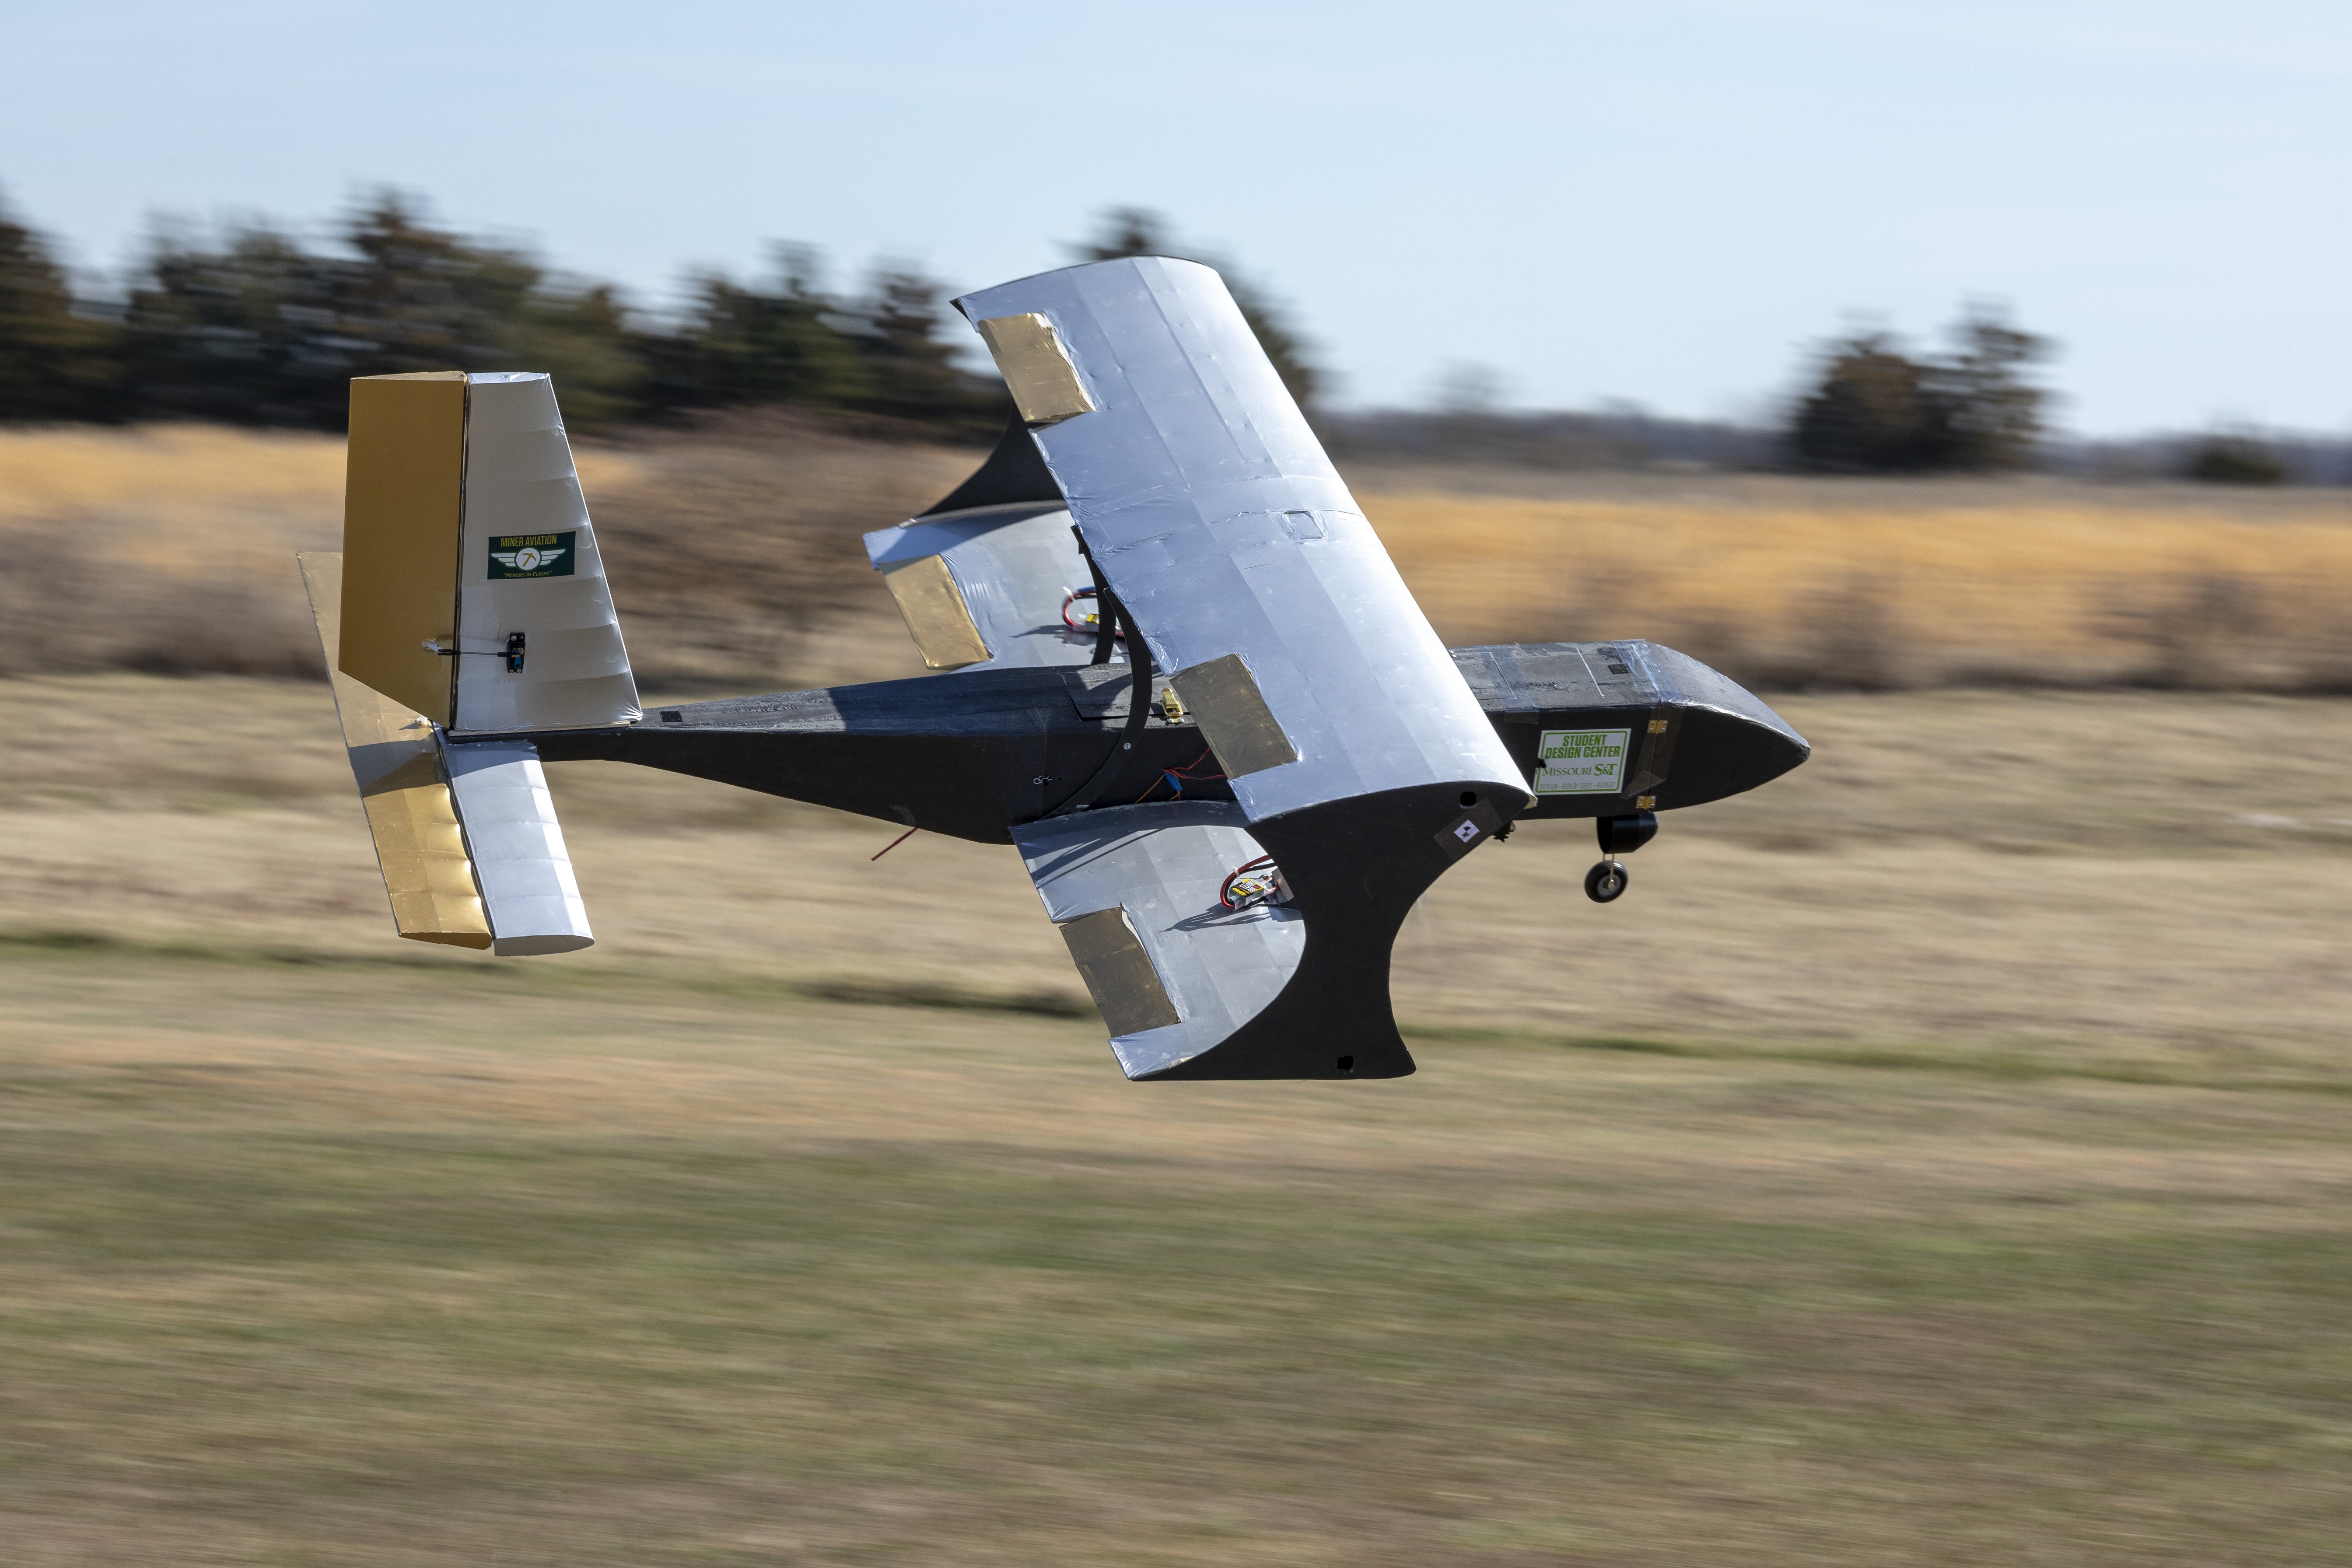 Photo Tom Wagner/Missouri S&amp;T, Miner Aviation design team flight test at Rolla National Airport RC strip, in Vichy, MO. Flight testing two different length banners, both successful deployments. ©Missouri S&amp;T 2019, All moral rights Asserted. RIGHTS Protected, this image is copyrighted and no usage is allowed without written permission from Missouri S&amp;T Marketing Communications Dept.